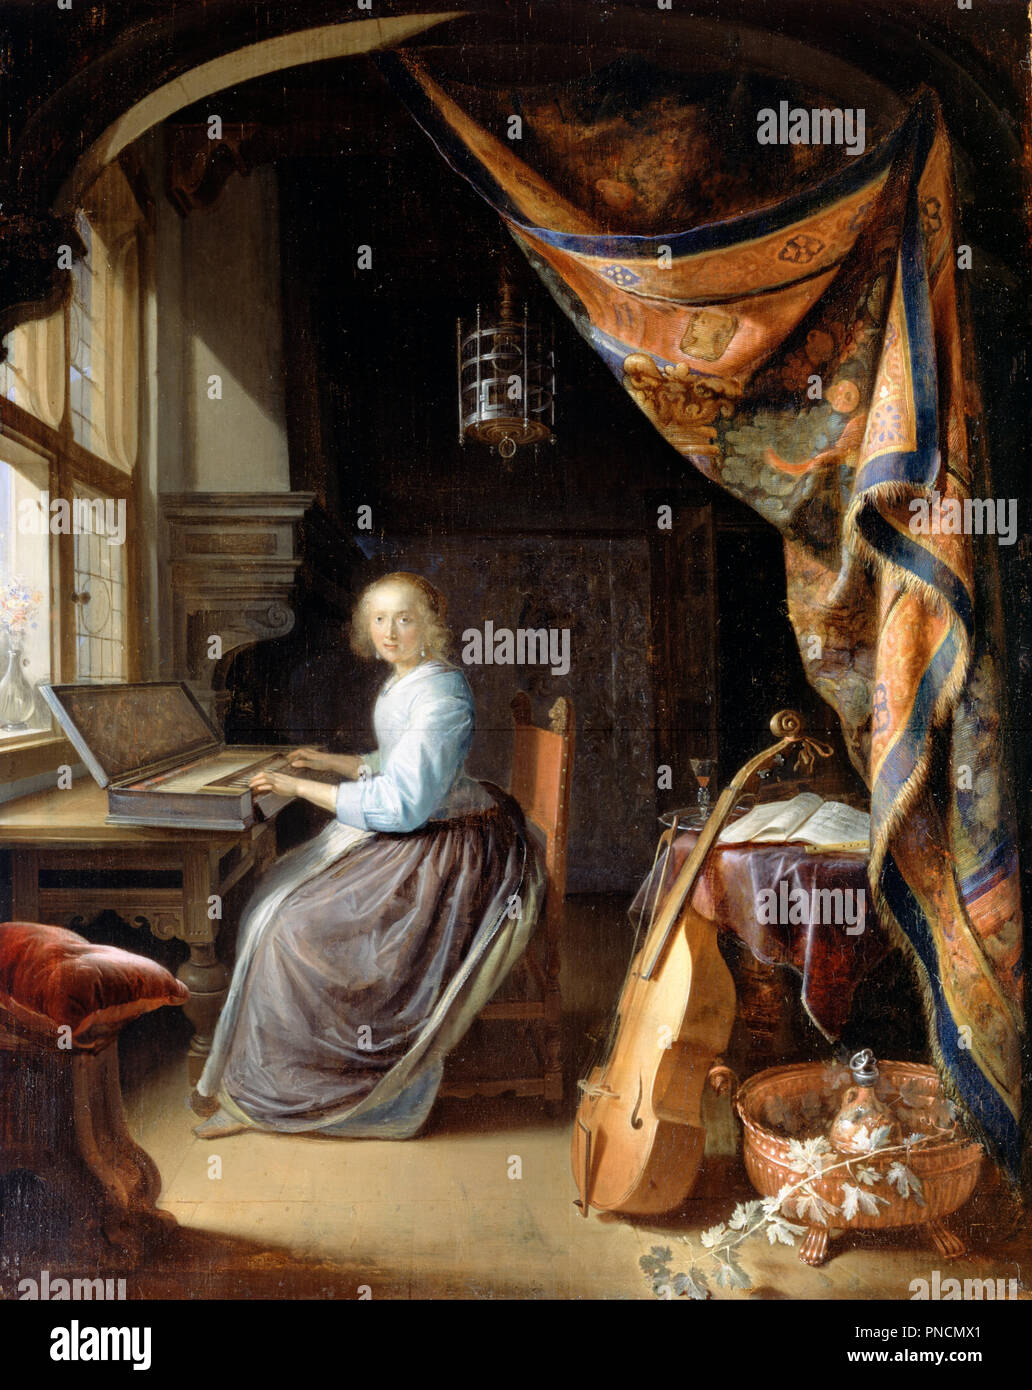 A Woman playing a Clavichord. Date/Period: Ca. 1665. Painting. Oil on panel Oil. Height: 377 mm (14.84 in); Width: 299 mm (11.77 in). Author: DOU, GERRIT. Gerard Dou. Stock Photo